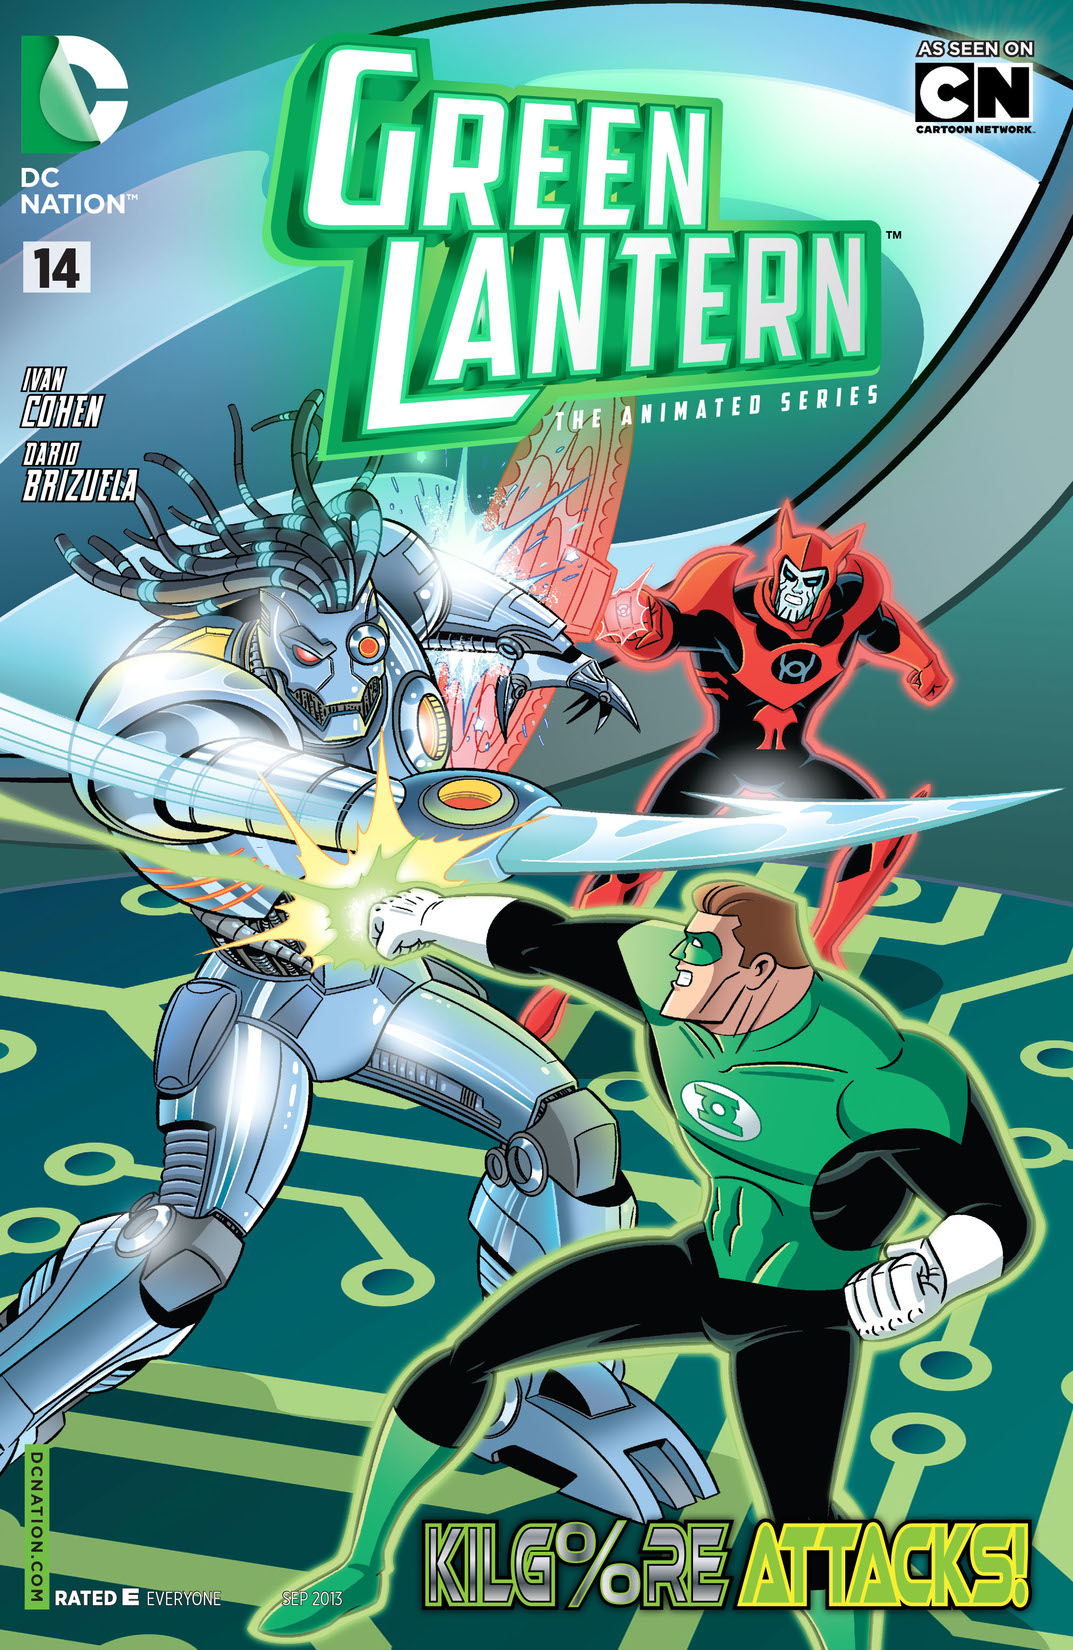 Green Lantern: The Animated Series #14 preview images